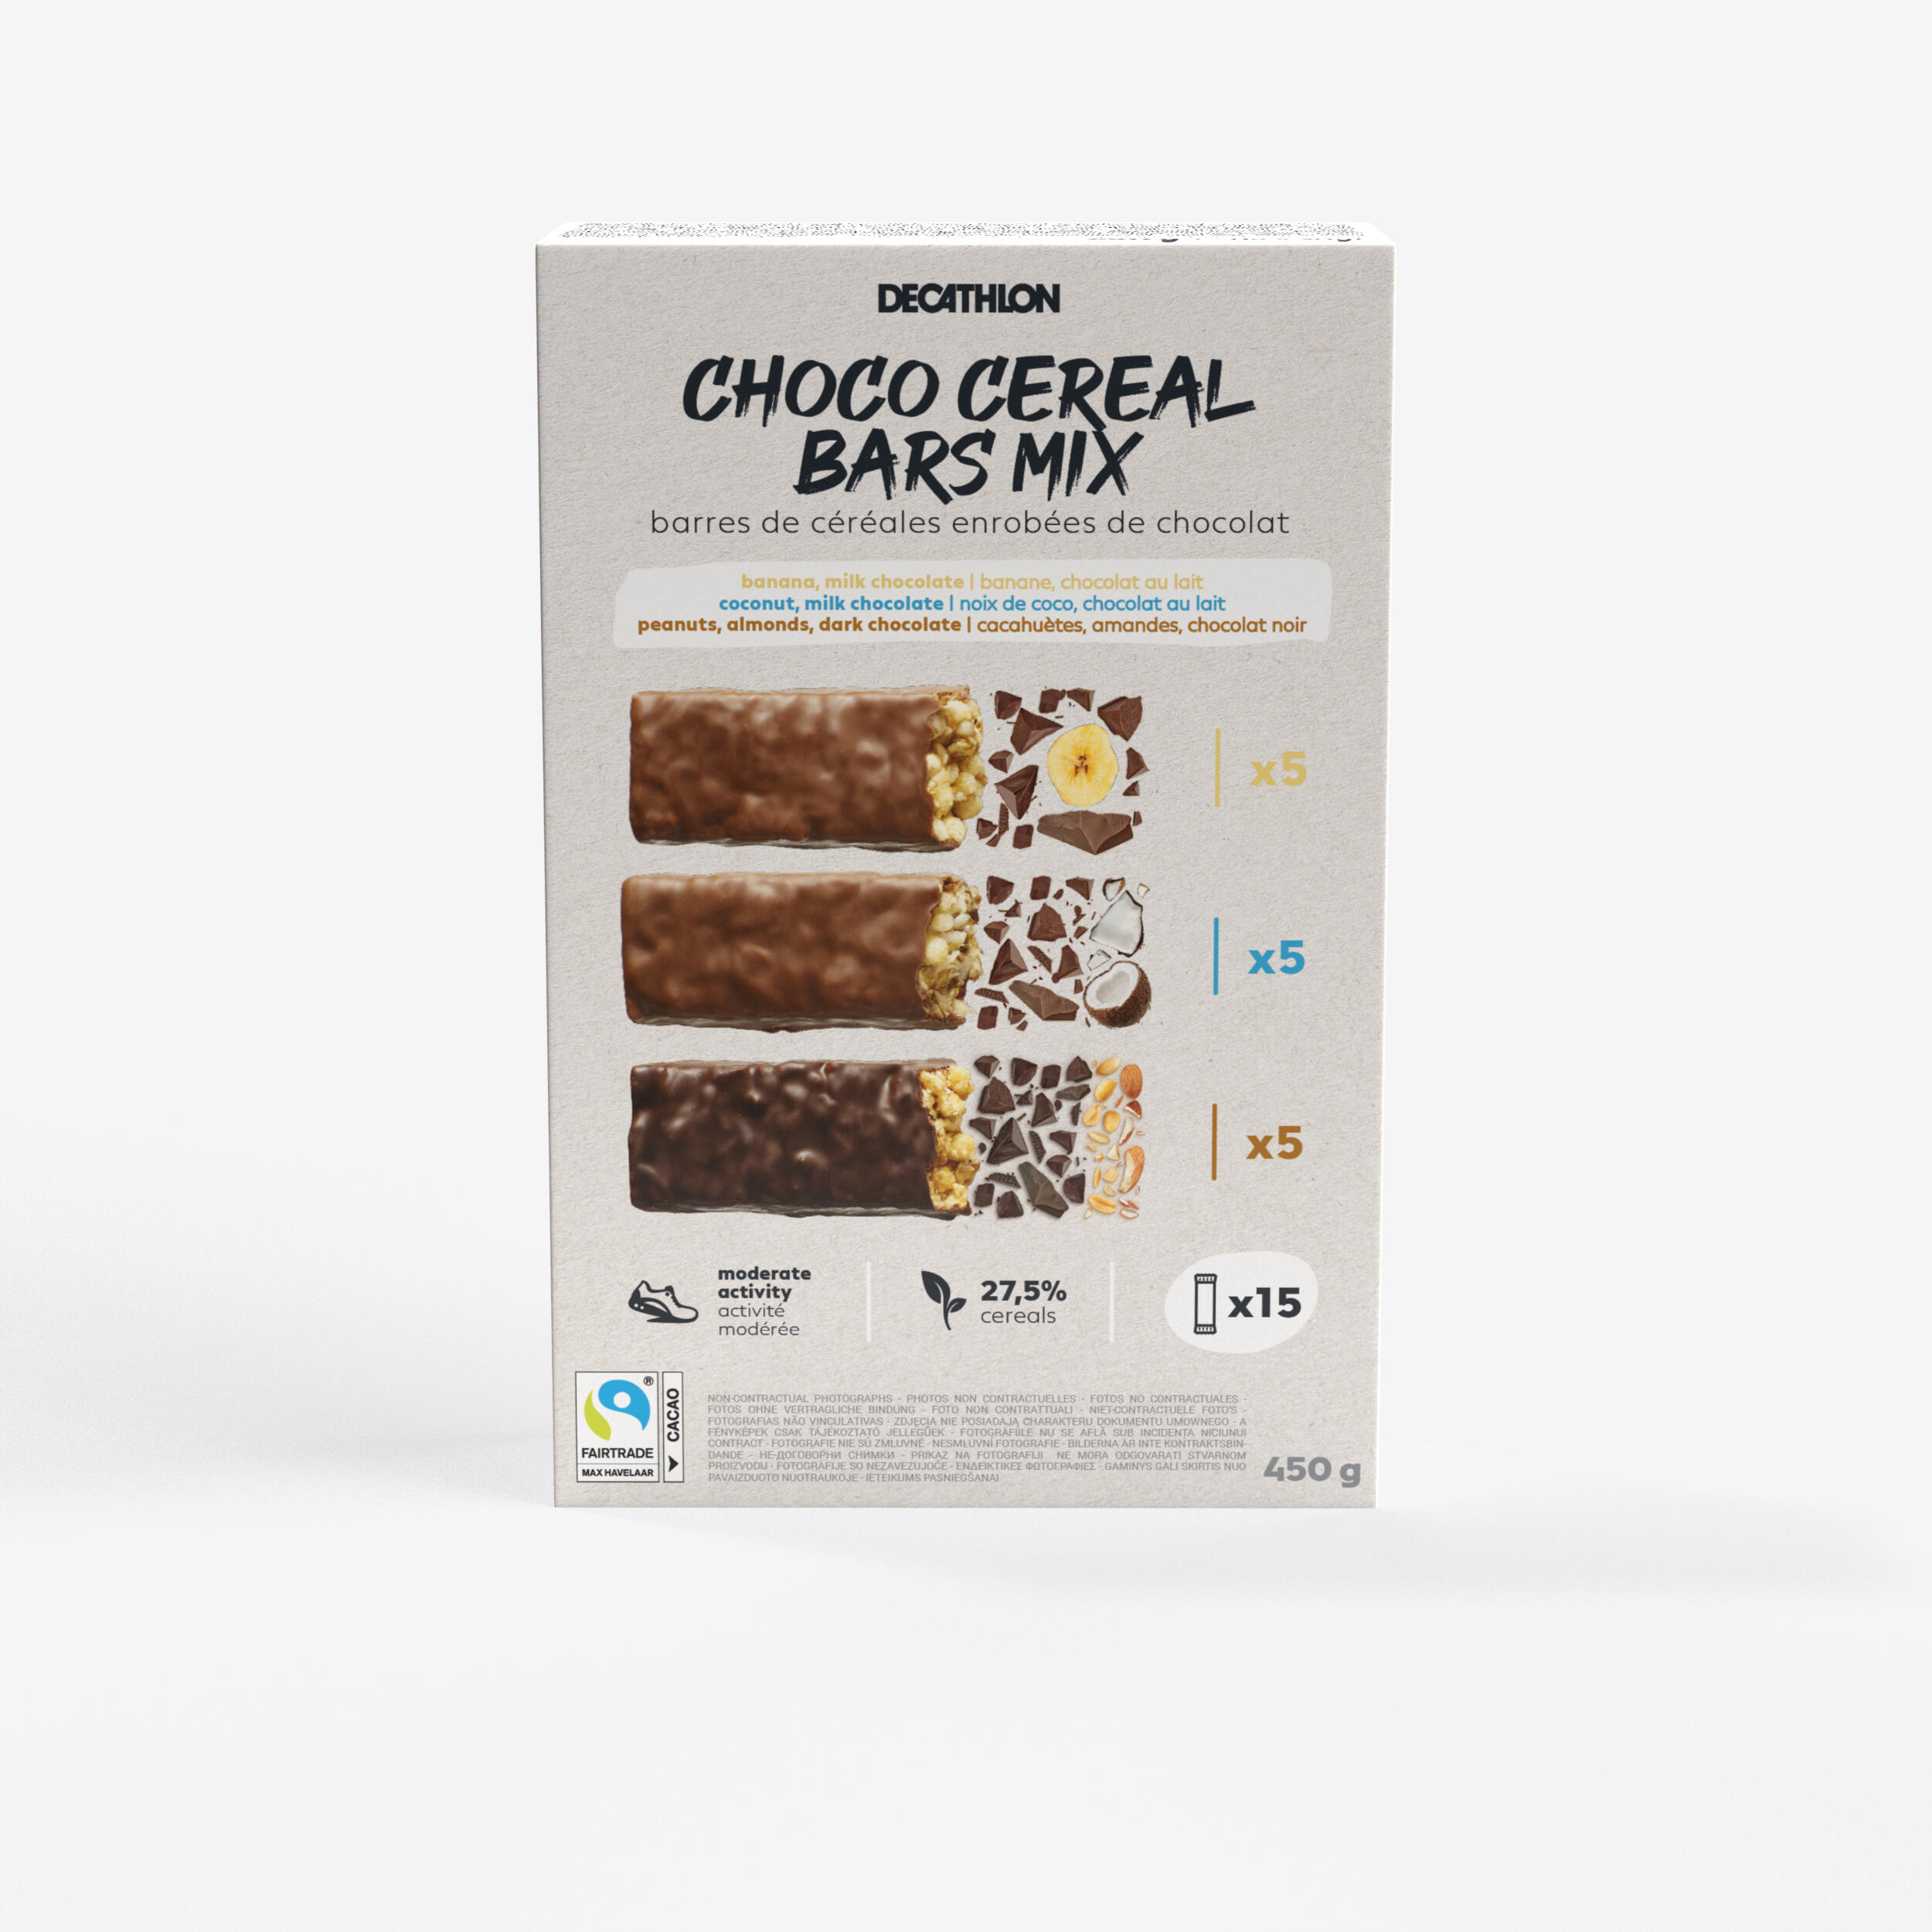 CHOCOLATE-COATED CEREAL MIX BARS x15 1/2